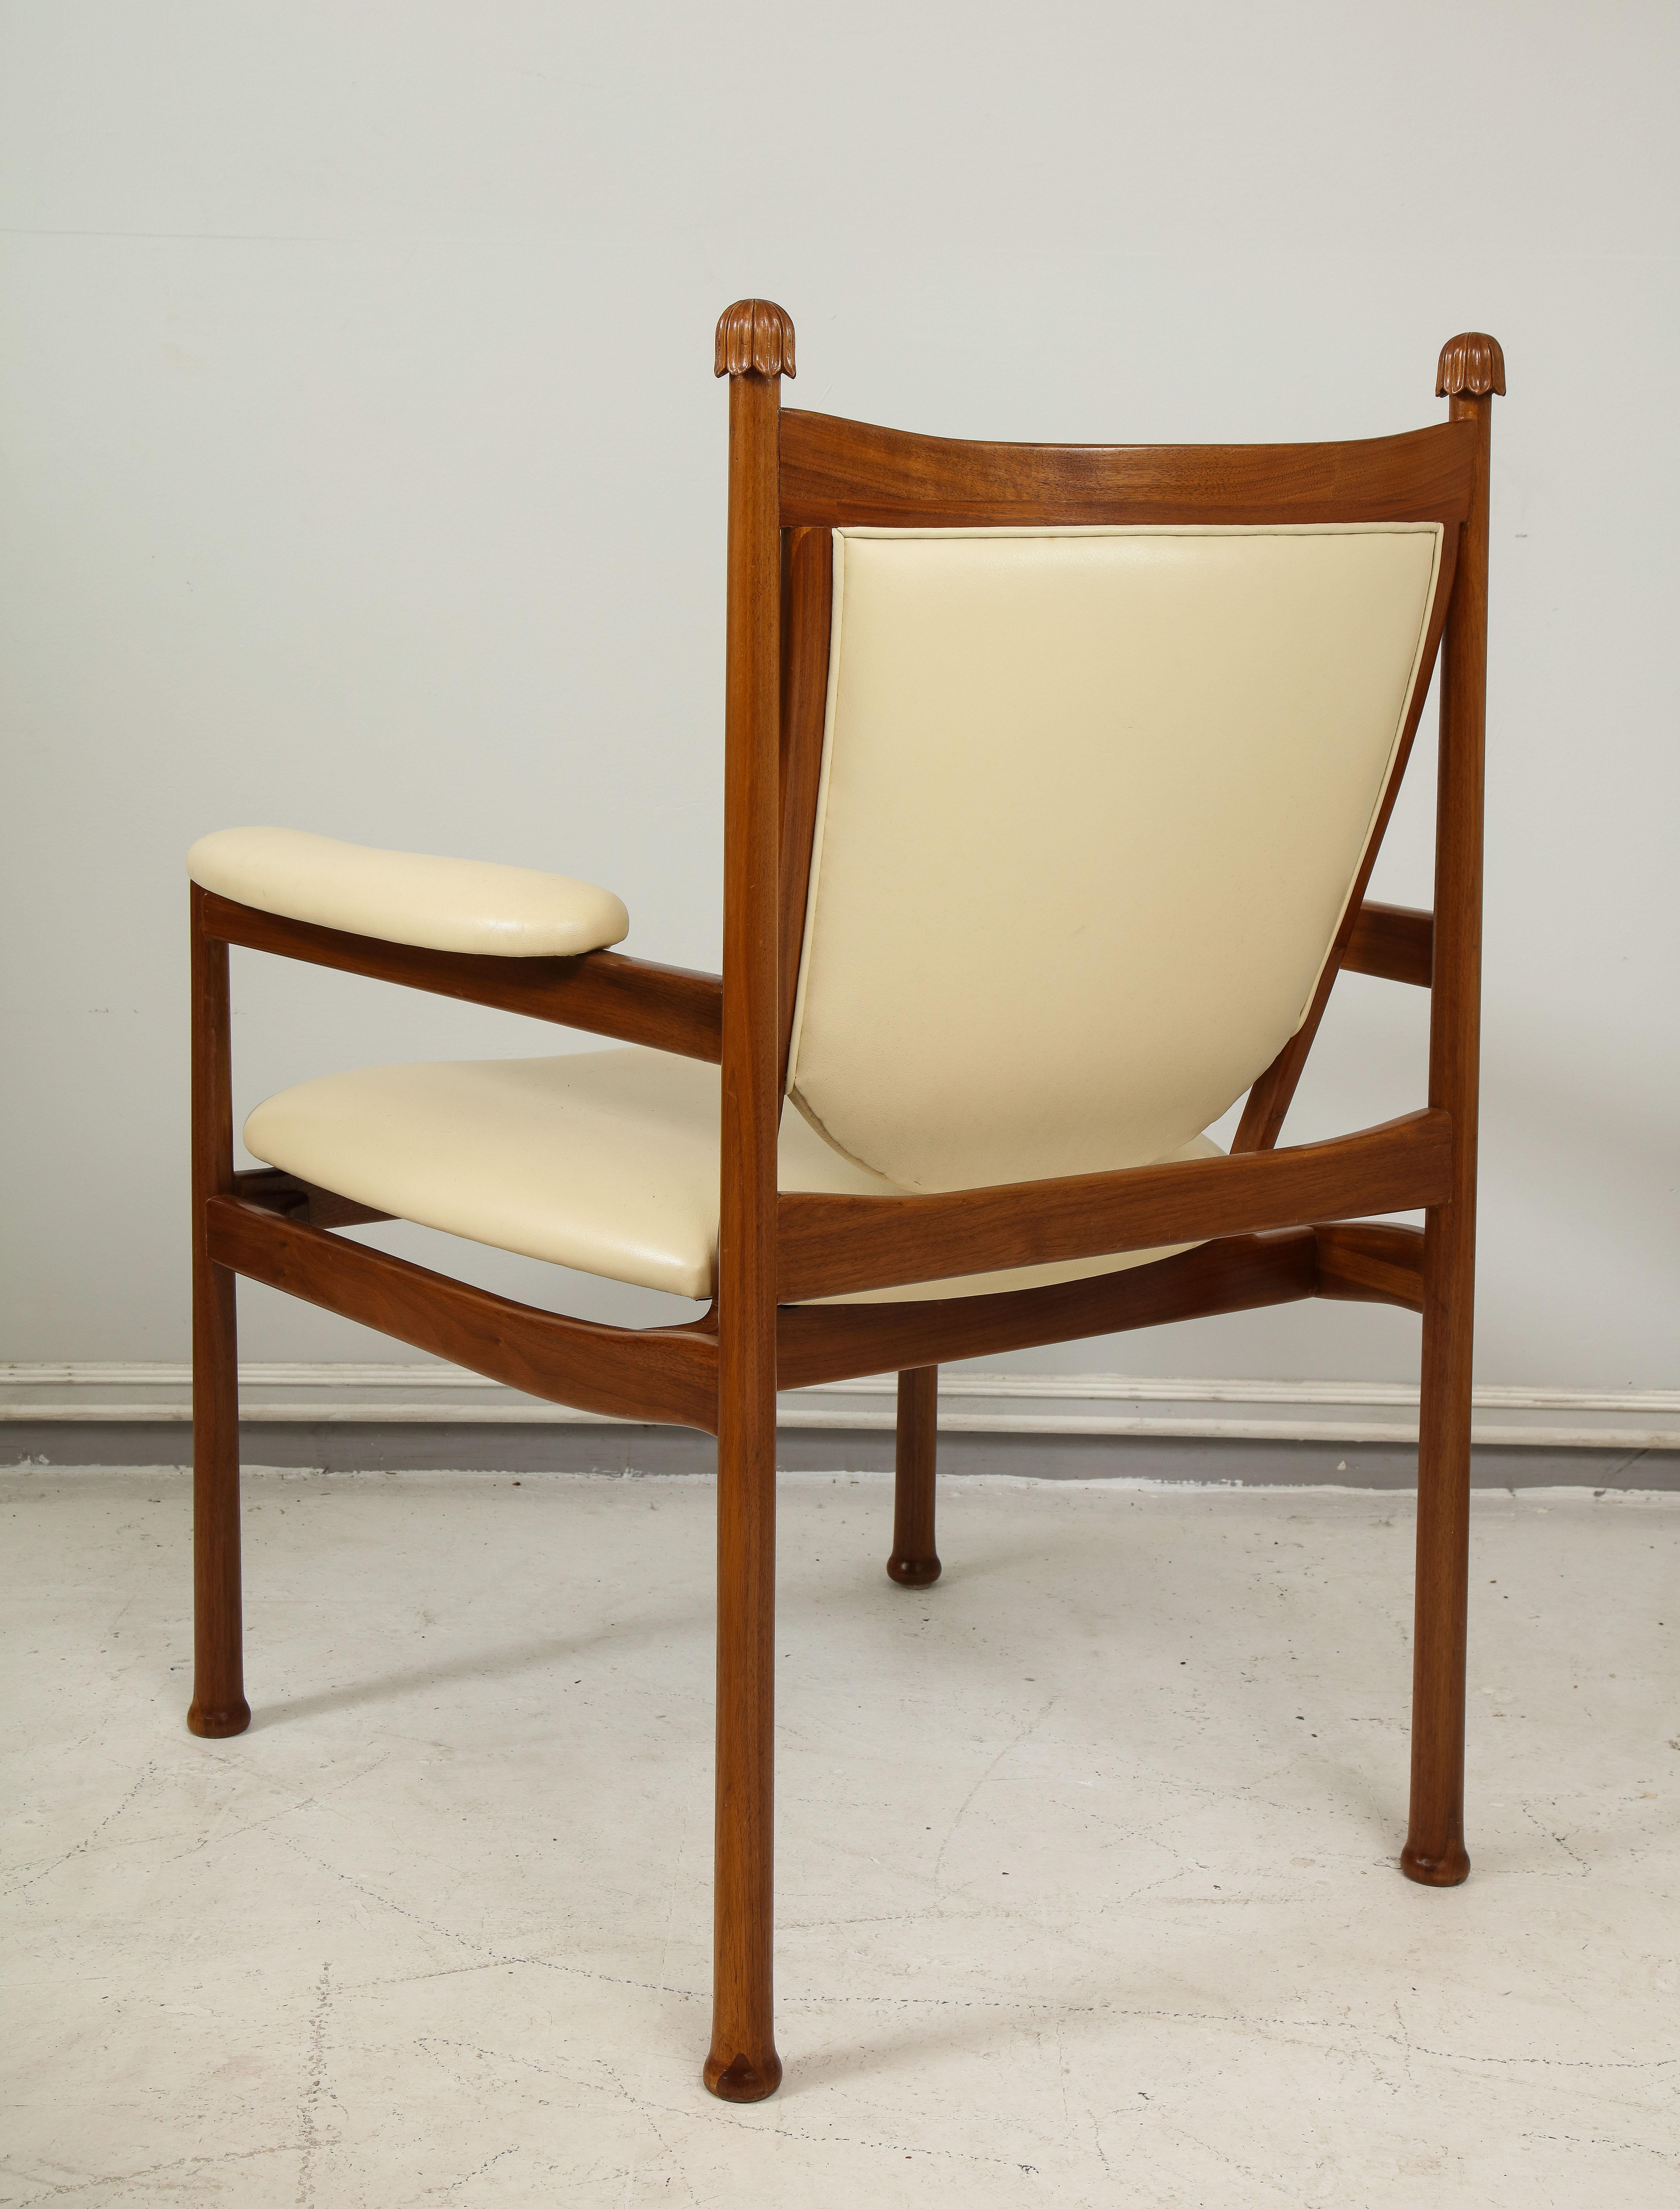 Custom Walnut Marion Armchair/ Lounge Chair Upholstered in Cream Leather In New Condition For Sale In New York, NY